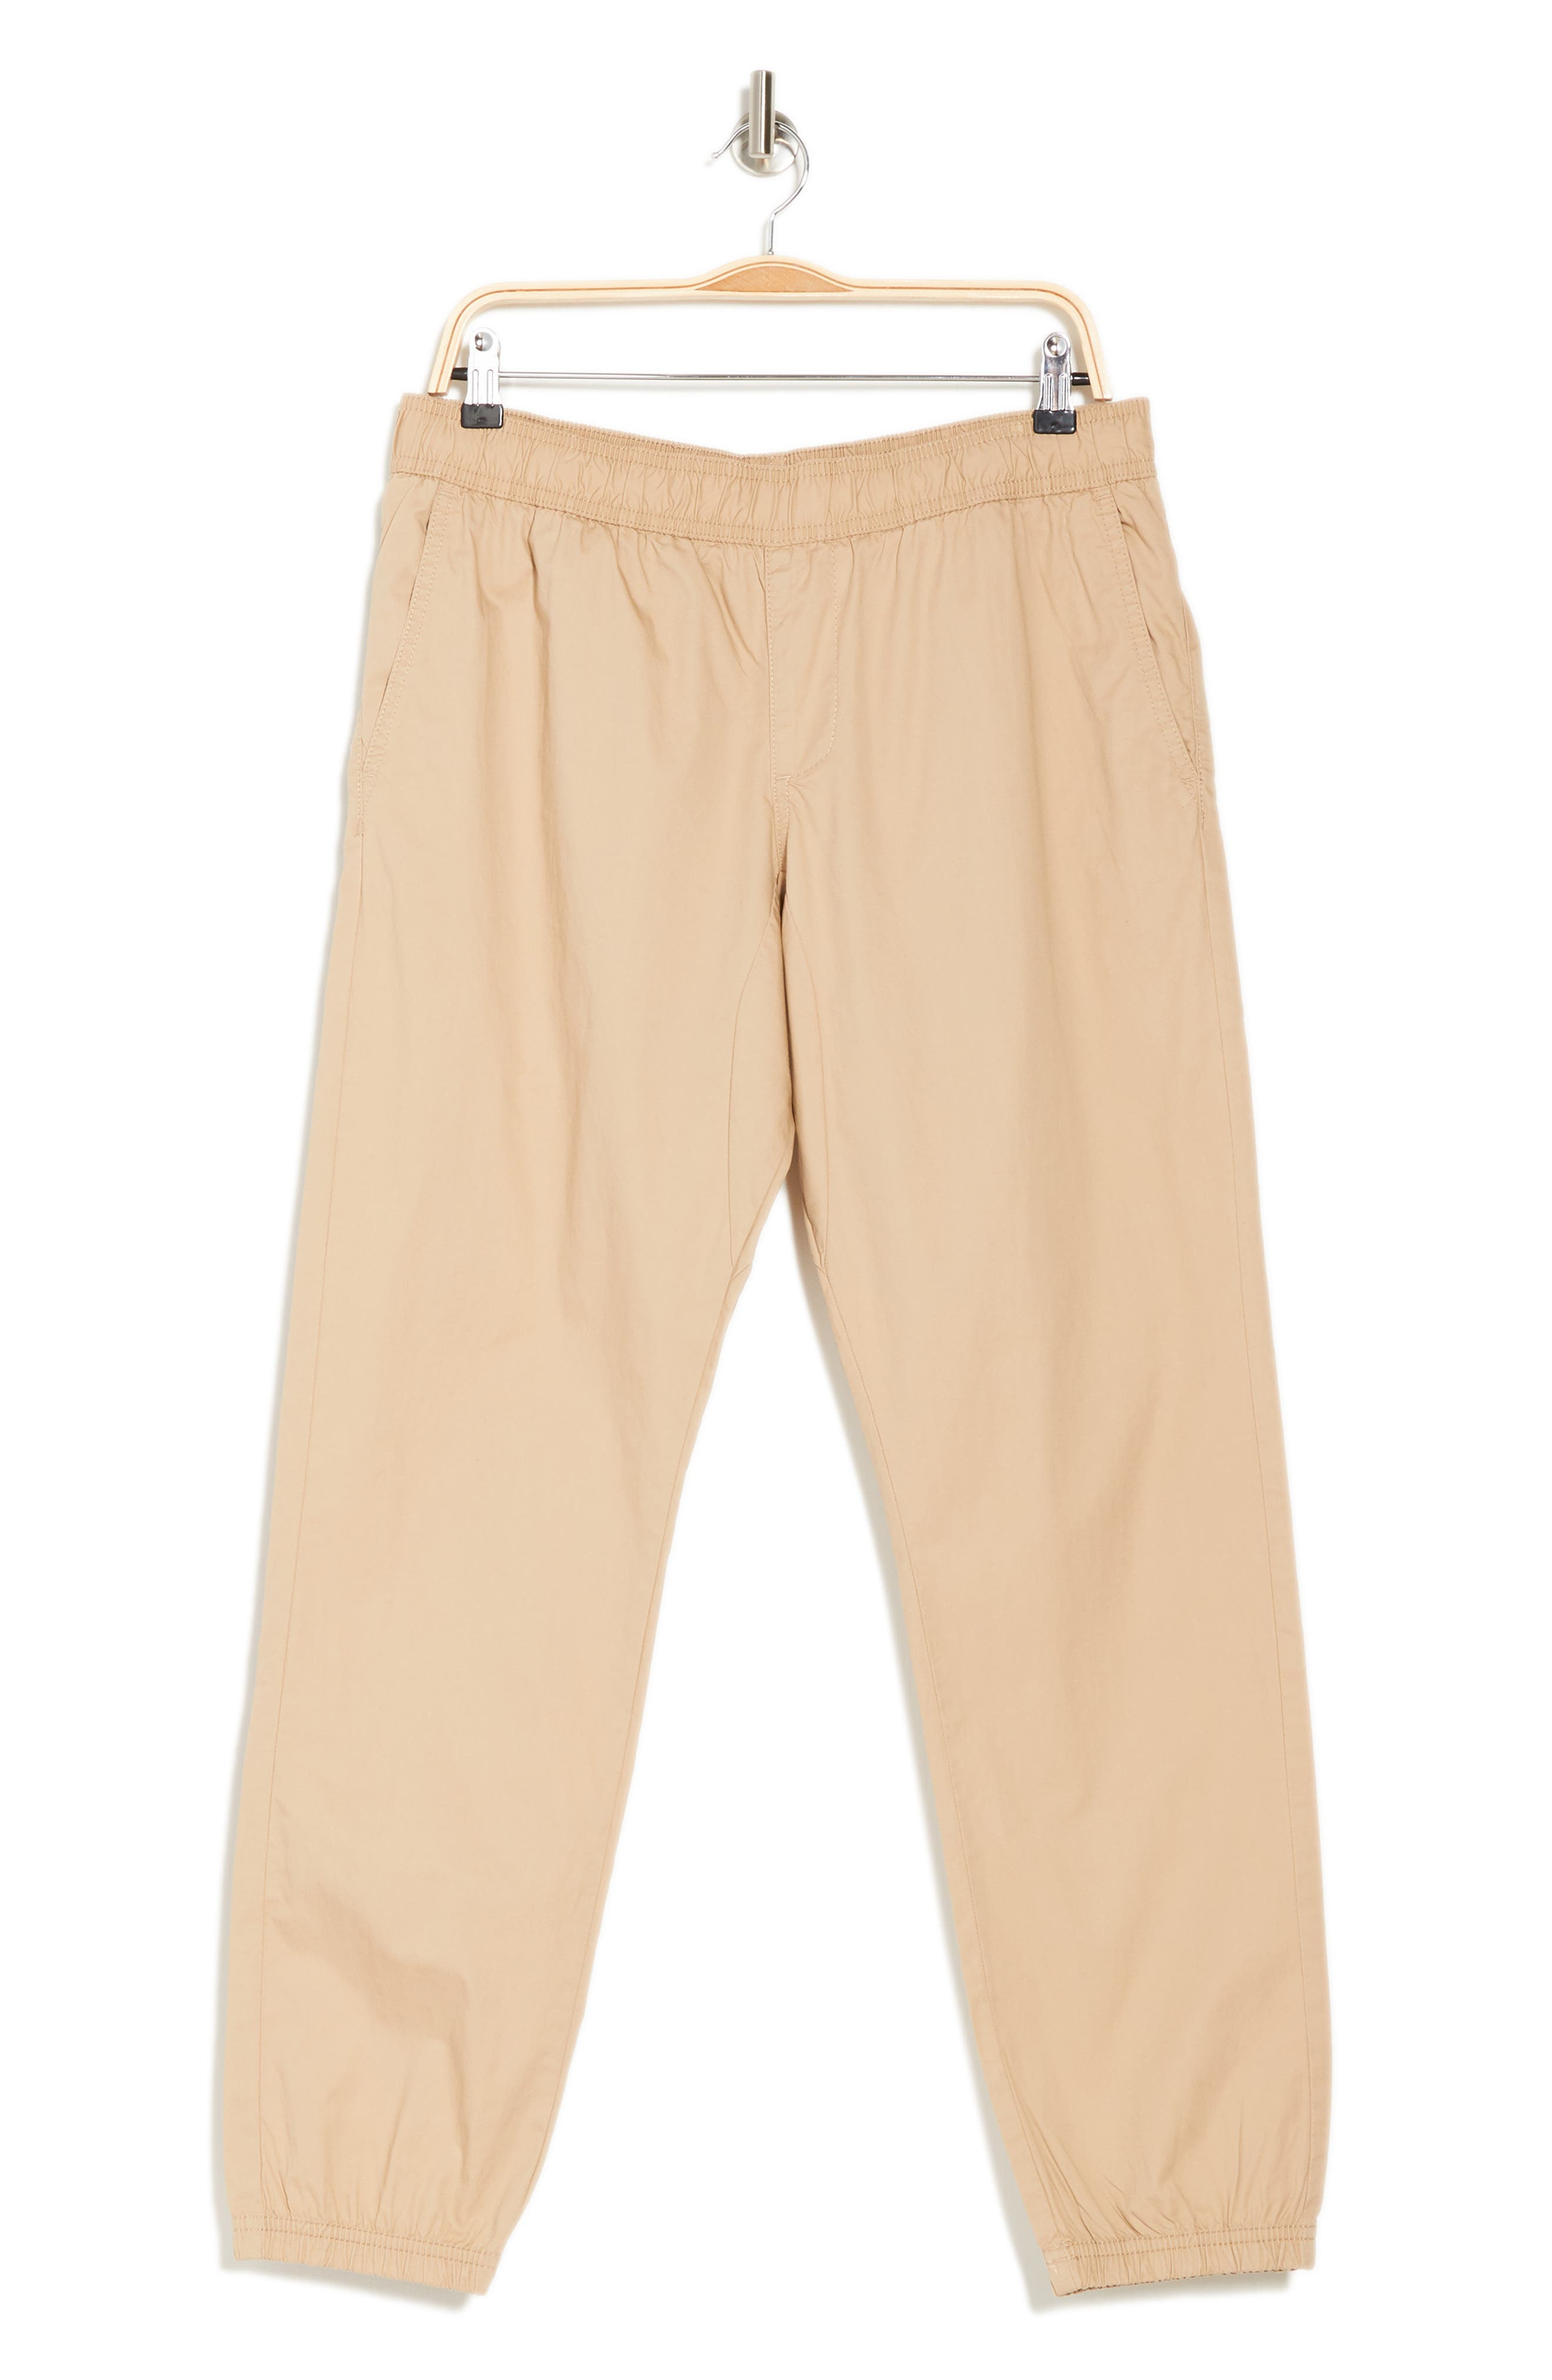 Abound Twill Joggers In Tan Nomad